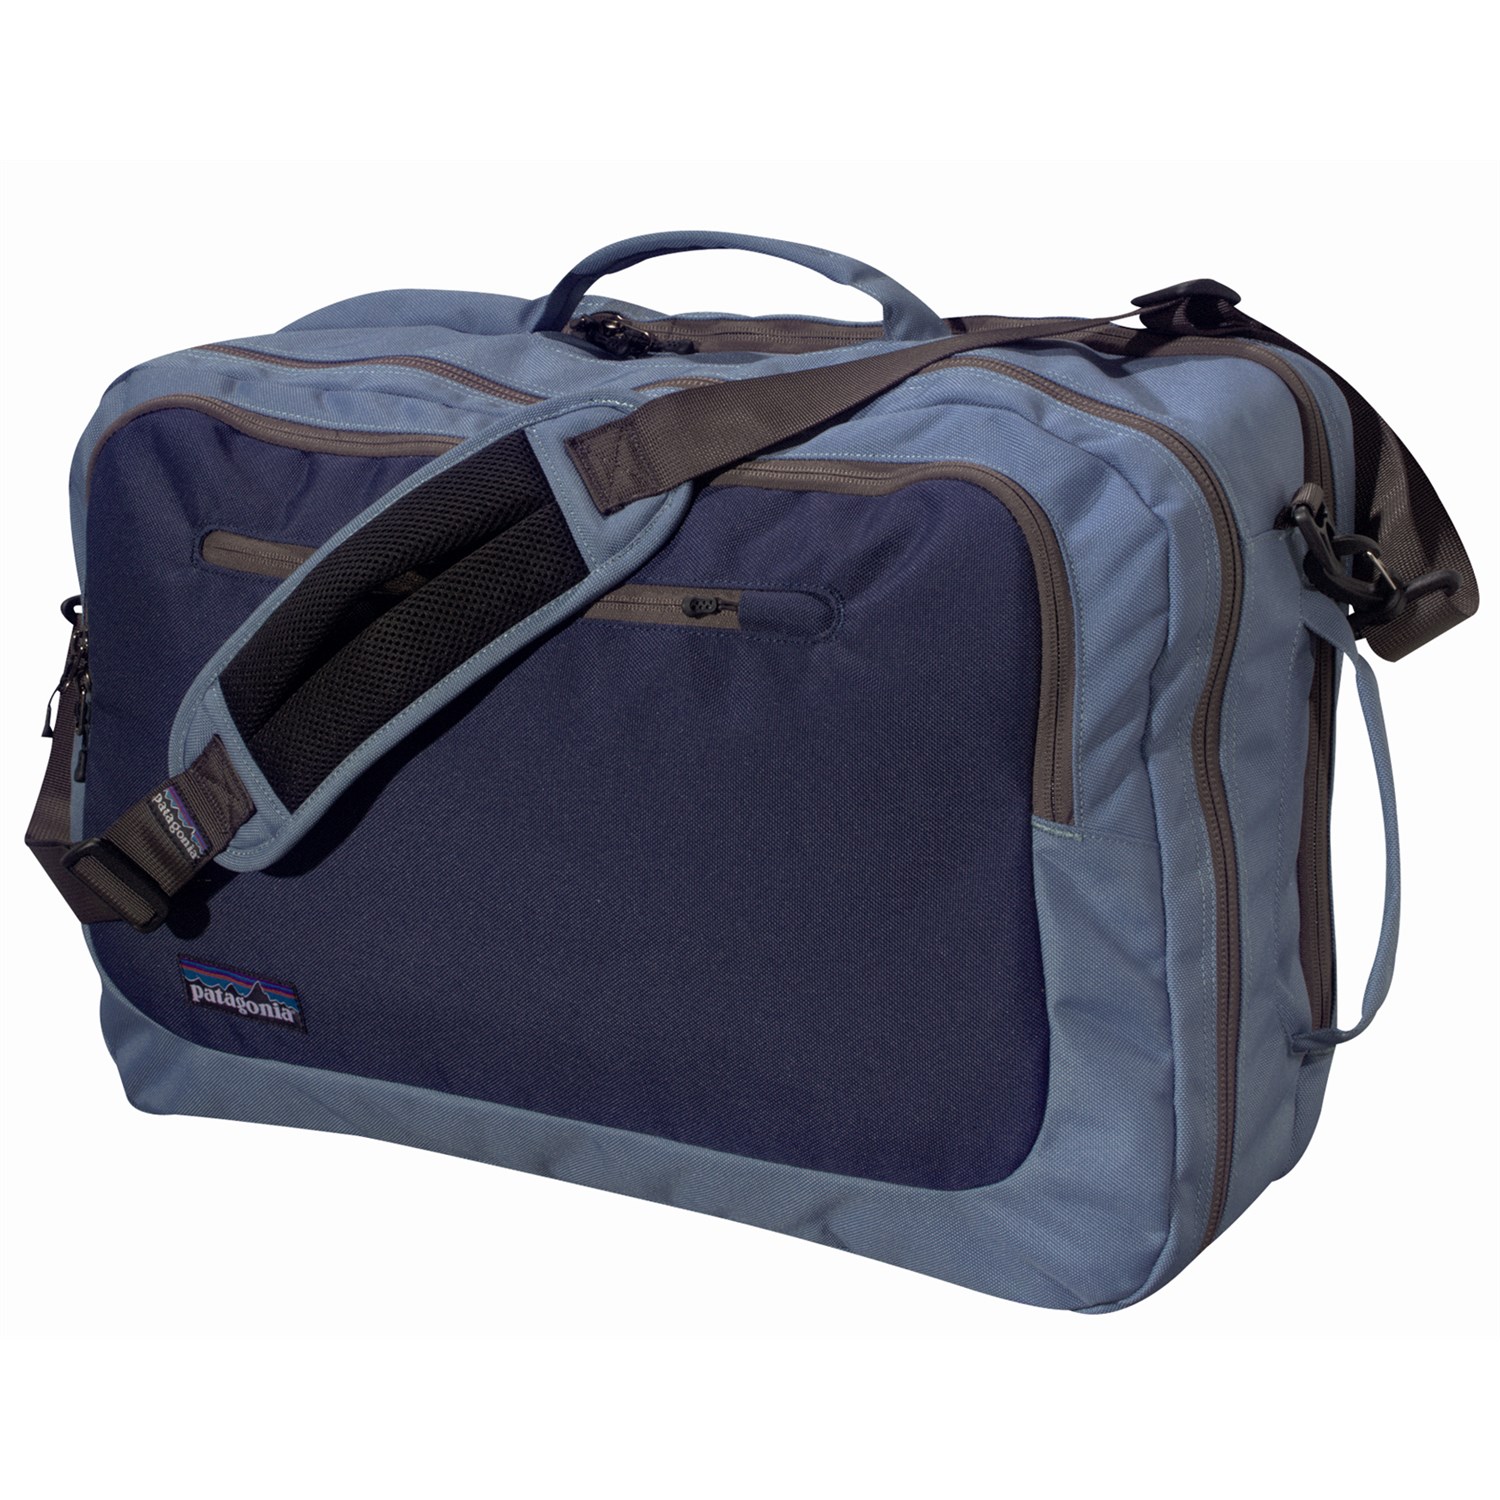 Patagonia MLC Carry-On Travel Bag | evo outlet